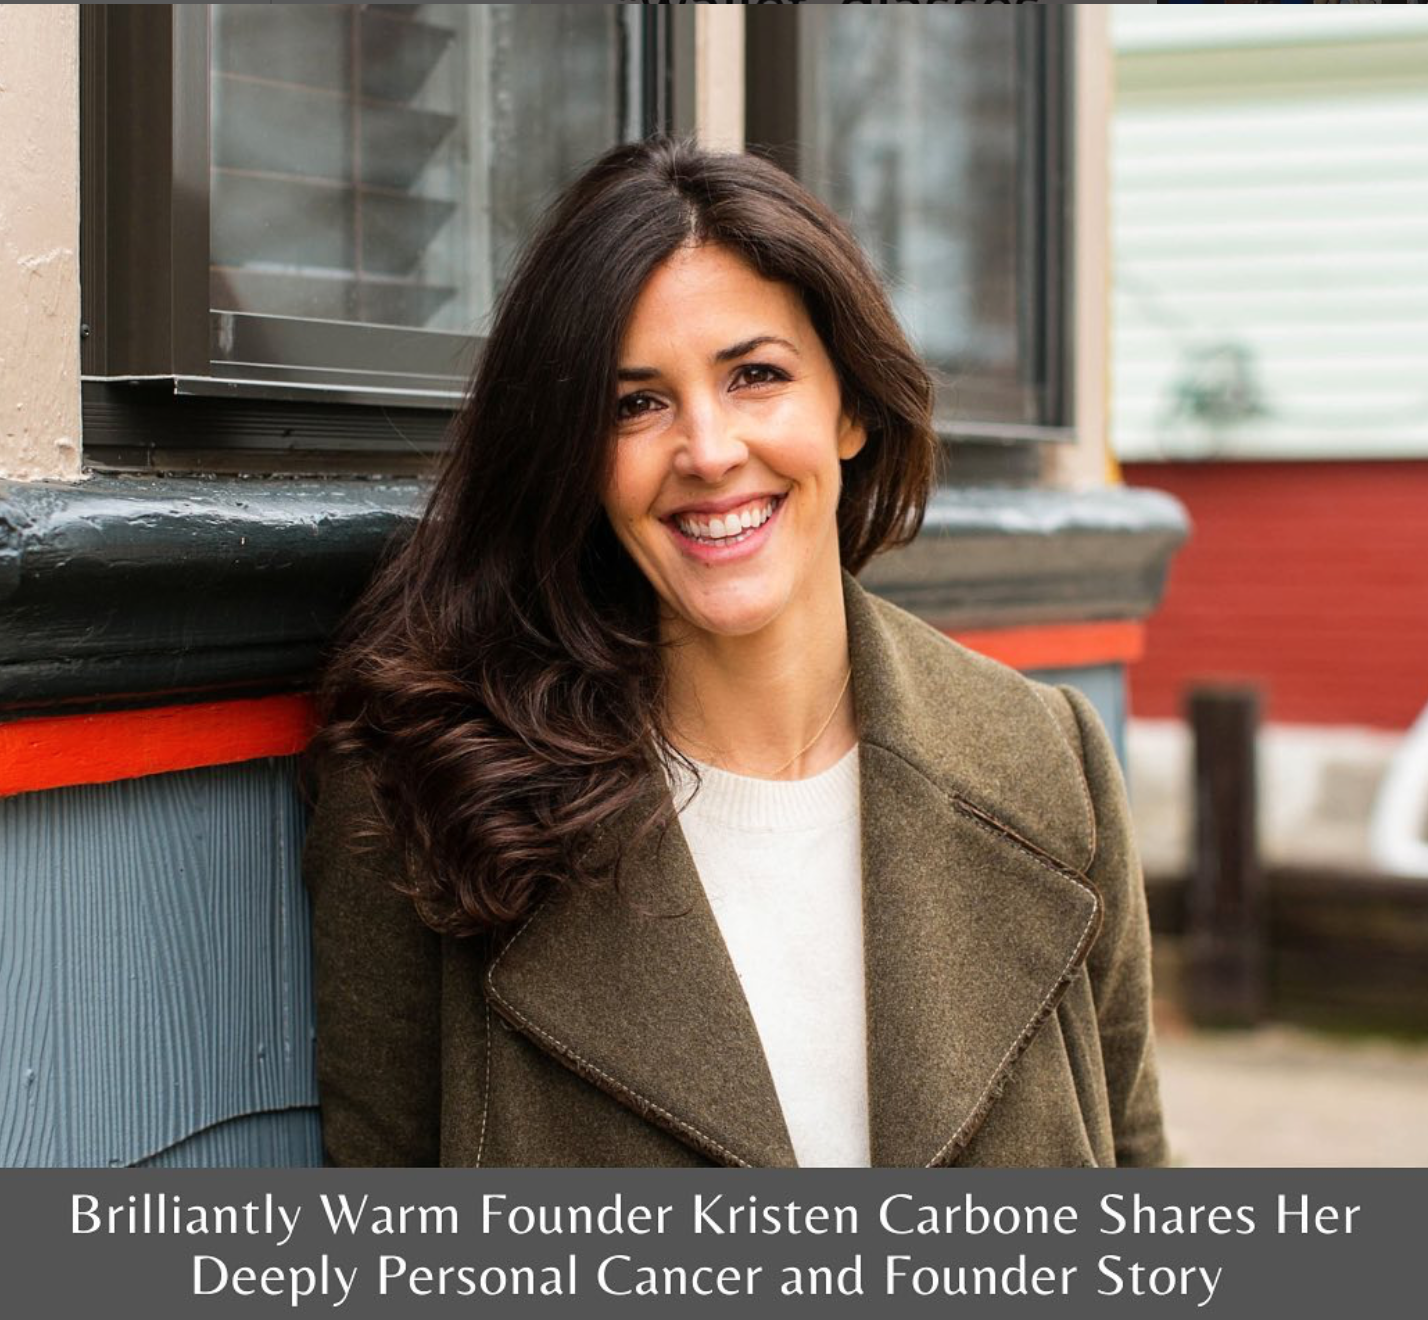 Brilliantly Warm Founder Kristen Carbone Shares Her Deeply Personal Cancer Story